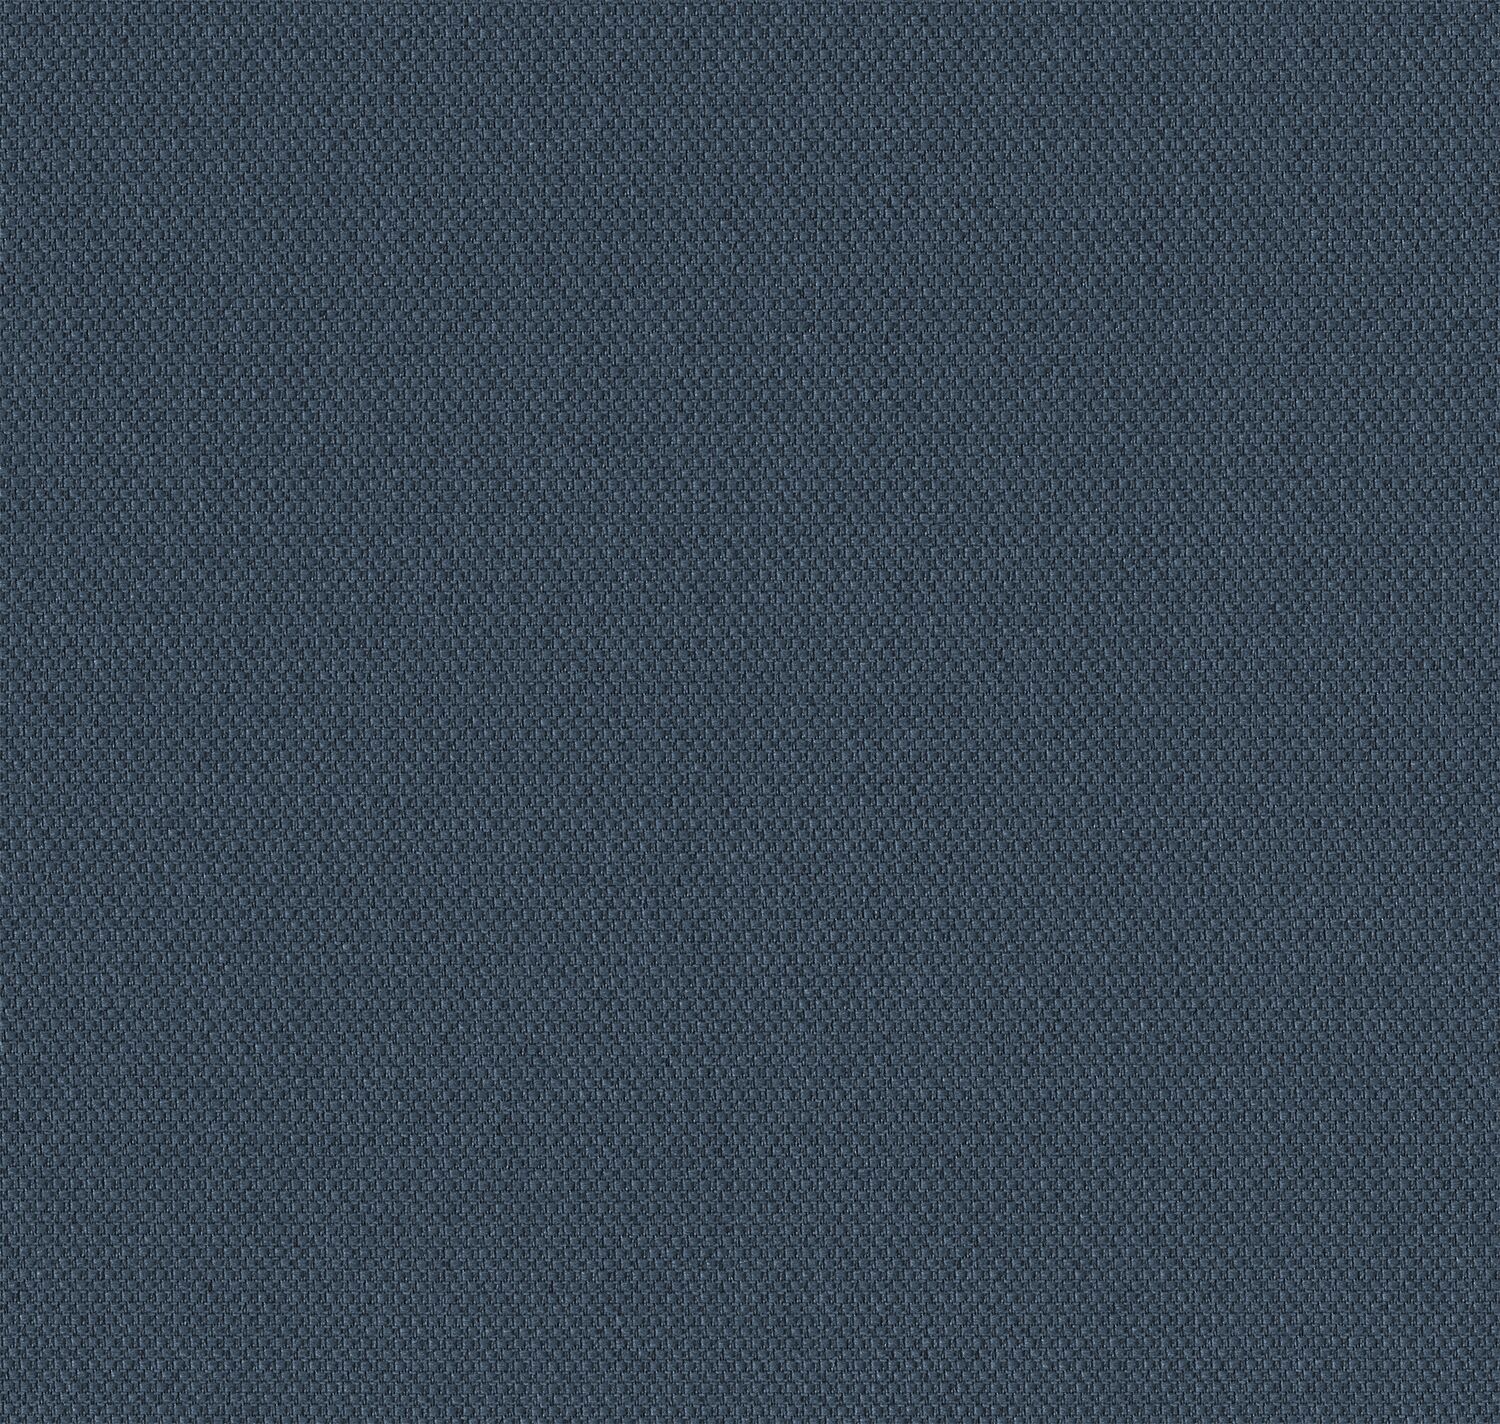 Biotope - Maritime - 4113 - 10 - Half Yard Tileable Swatches